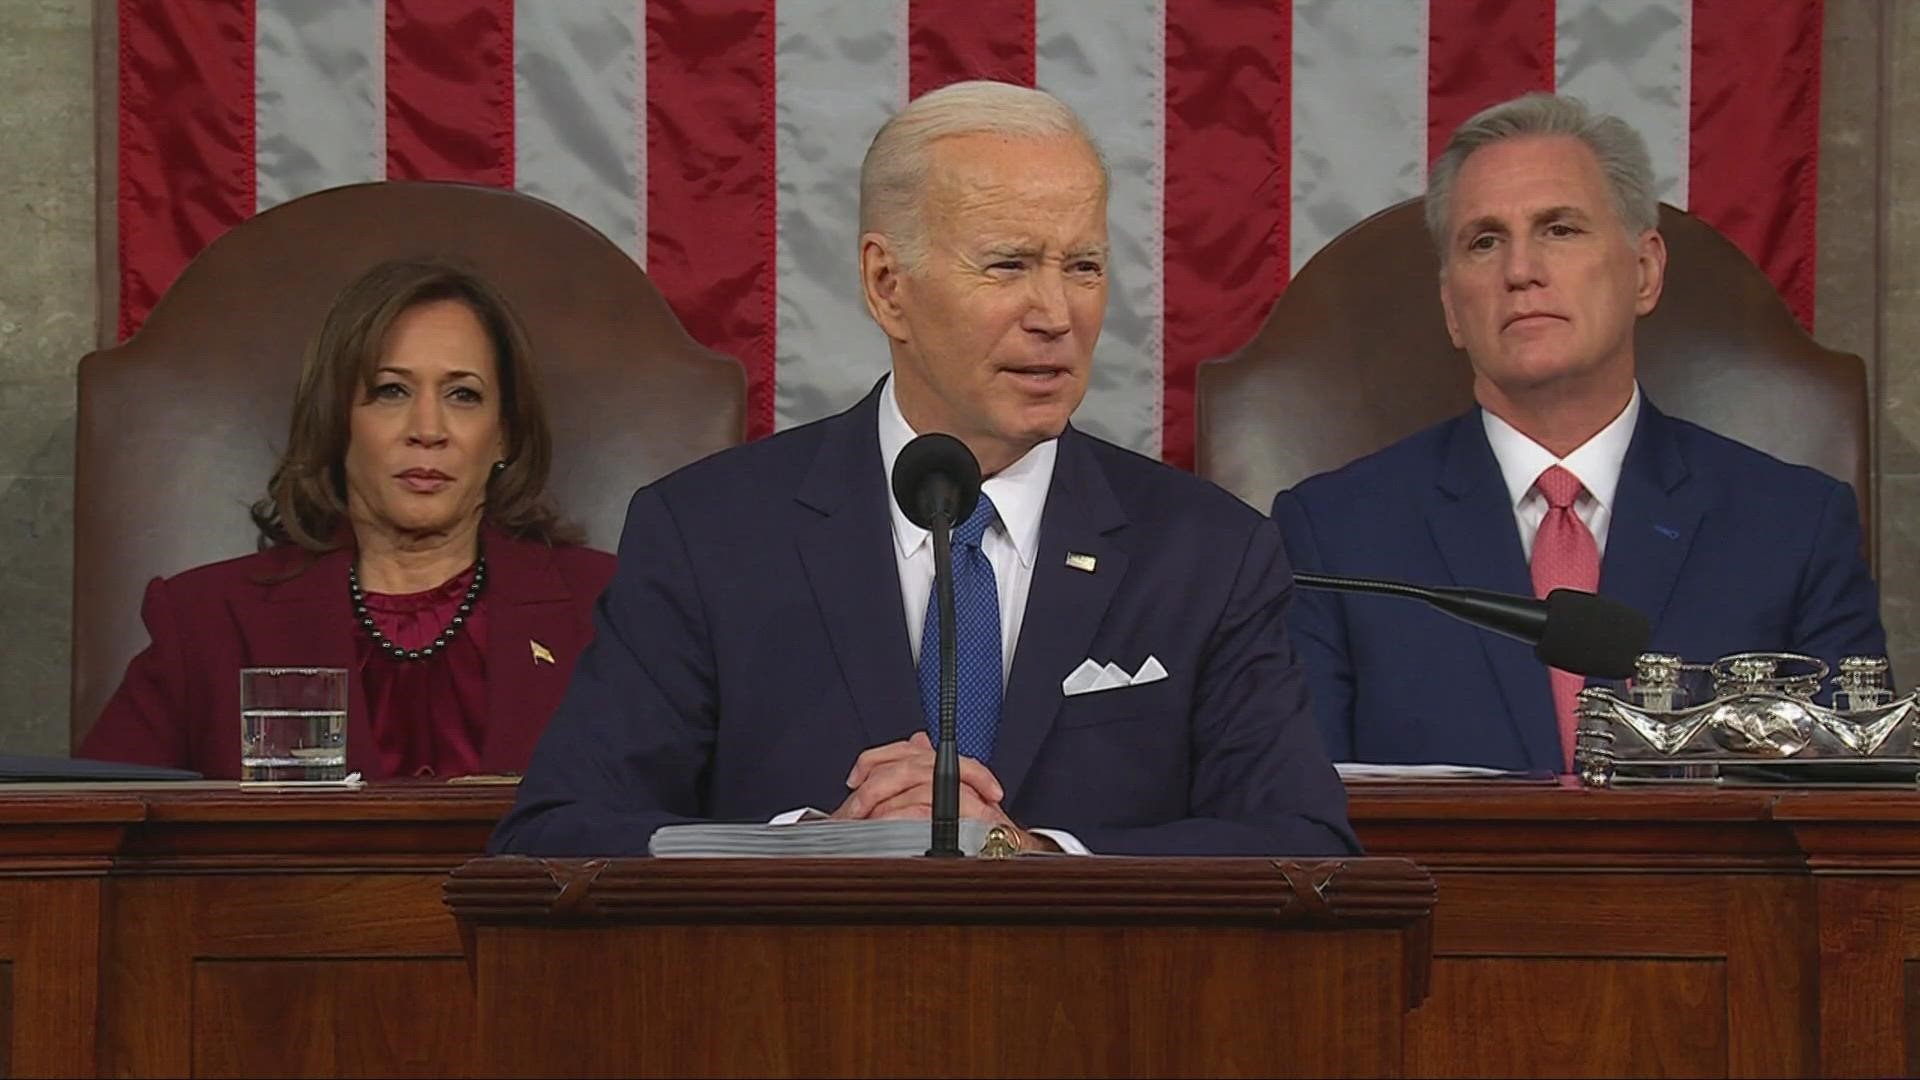 President Biden used his address Tuesday night to reassure a country beset by pessimism and fraught political divisions.